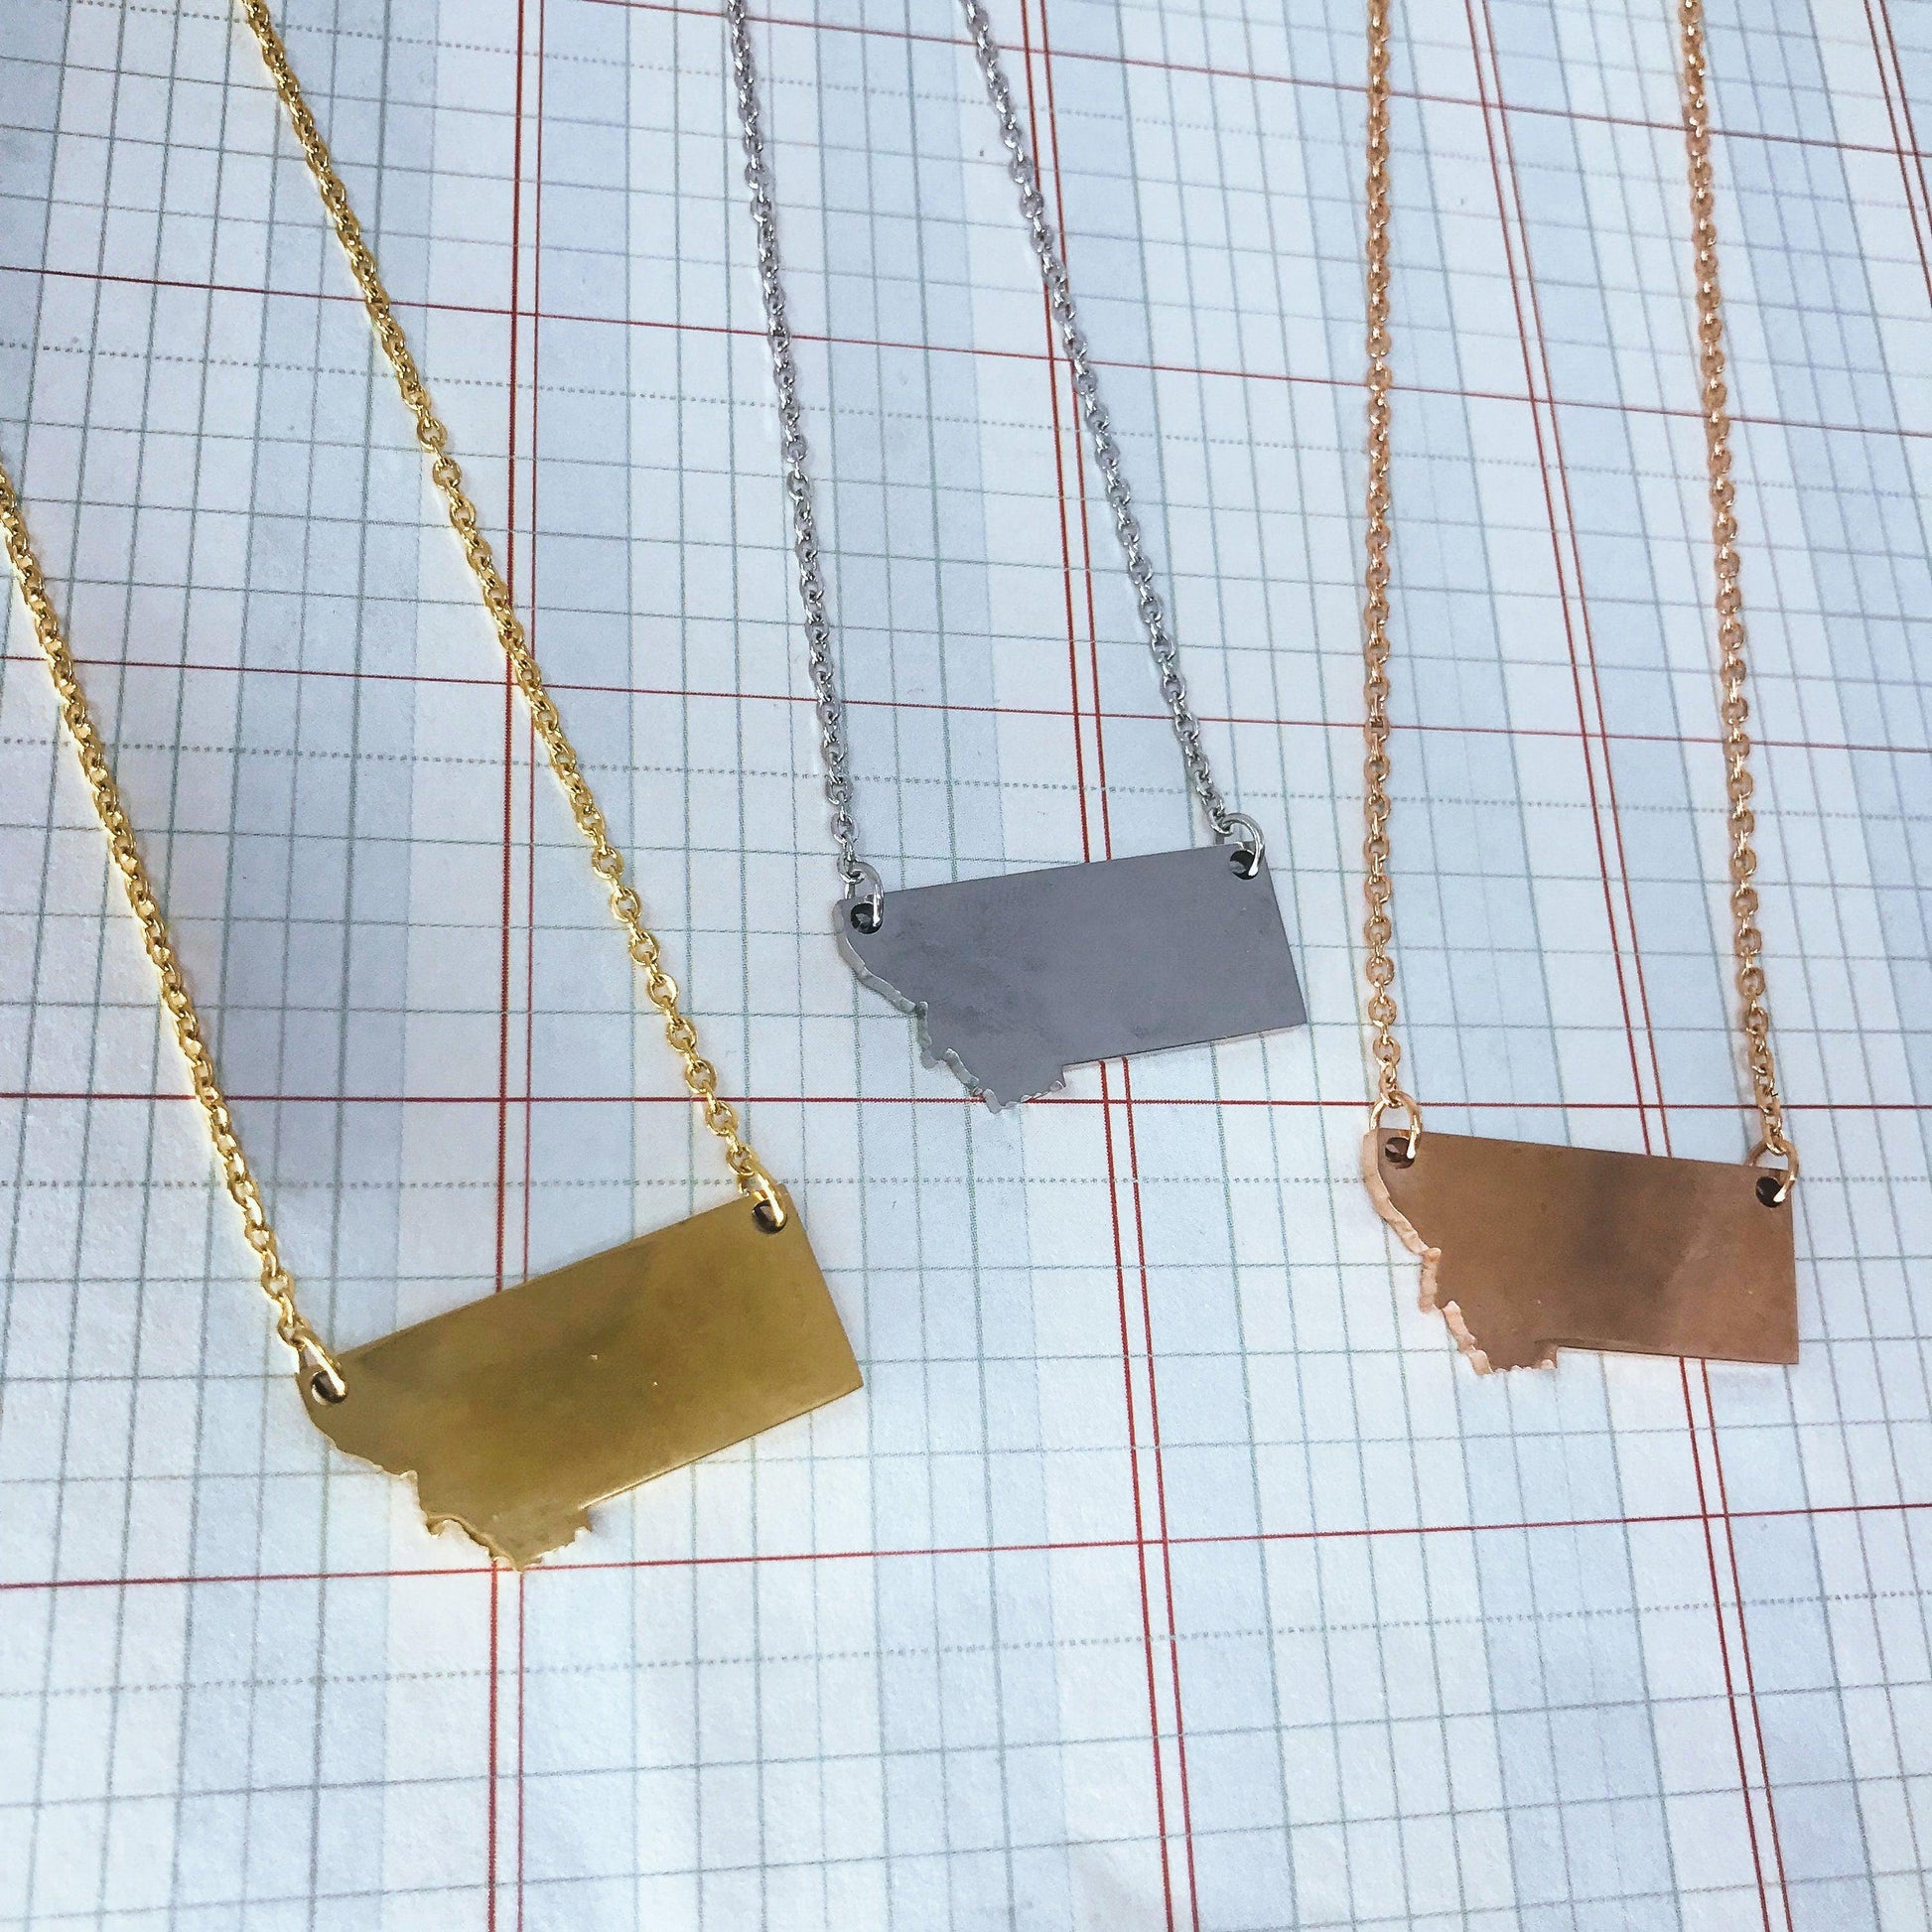 Montana State Silhouette Necklaces in 3 different colors: Gold, Silver & Rose Gold